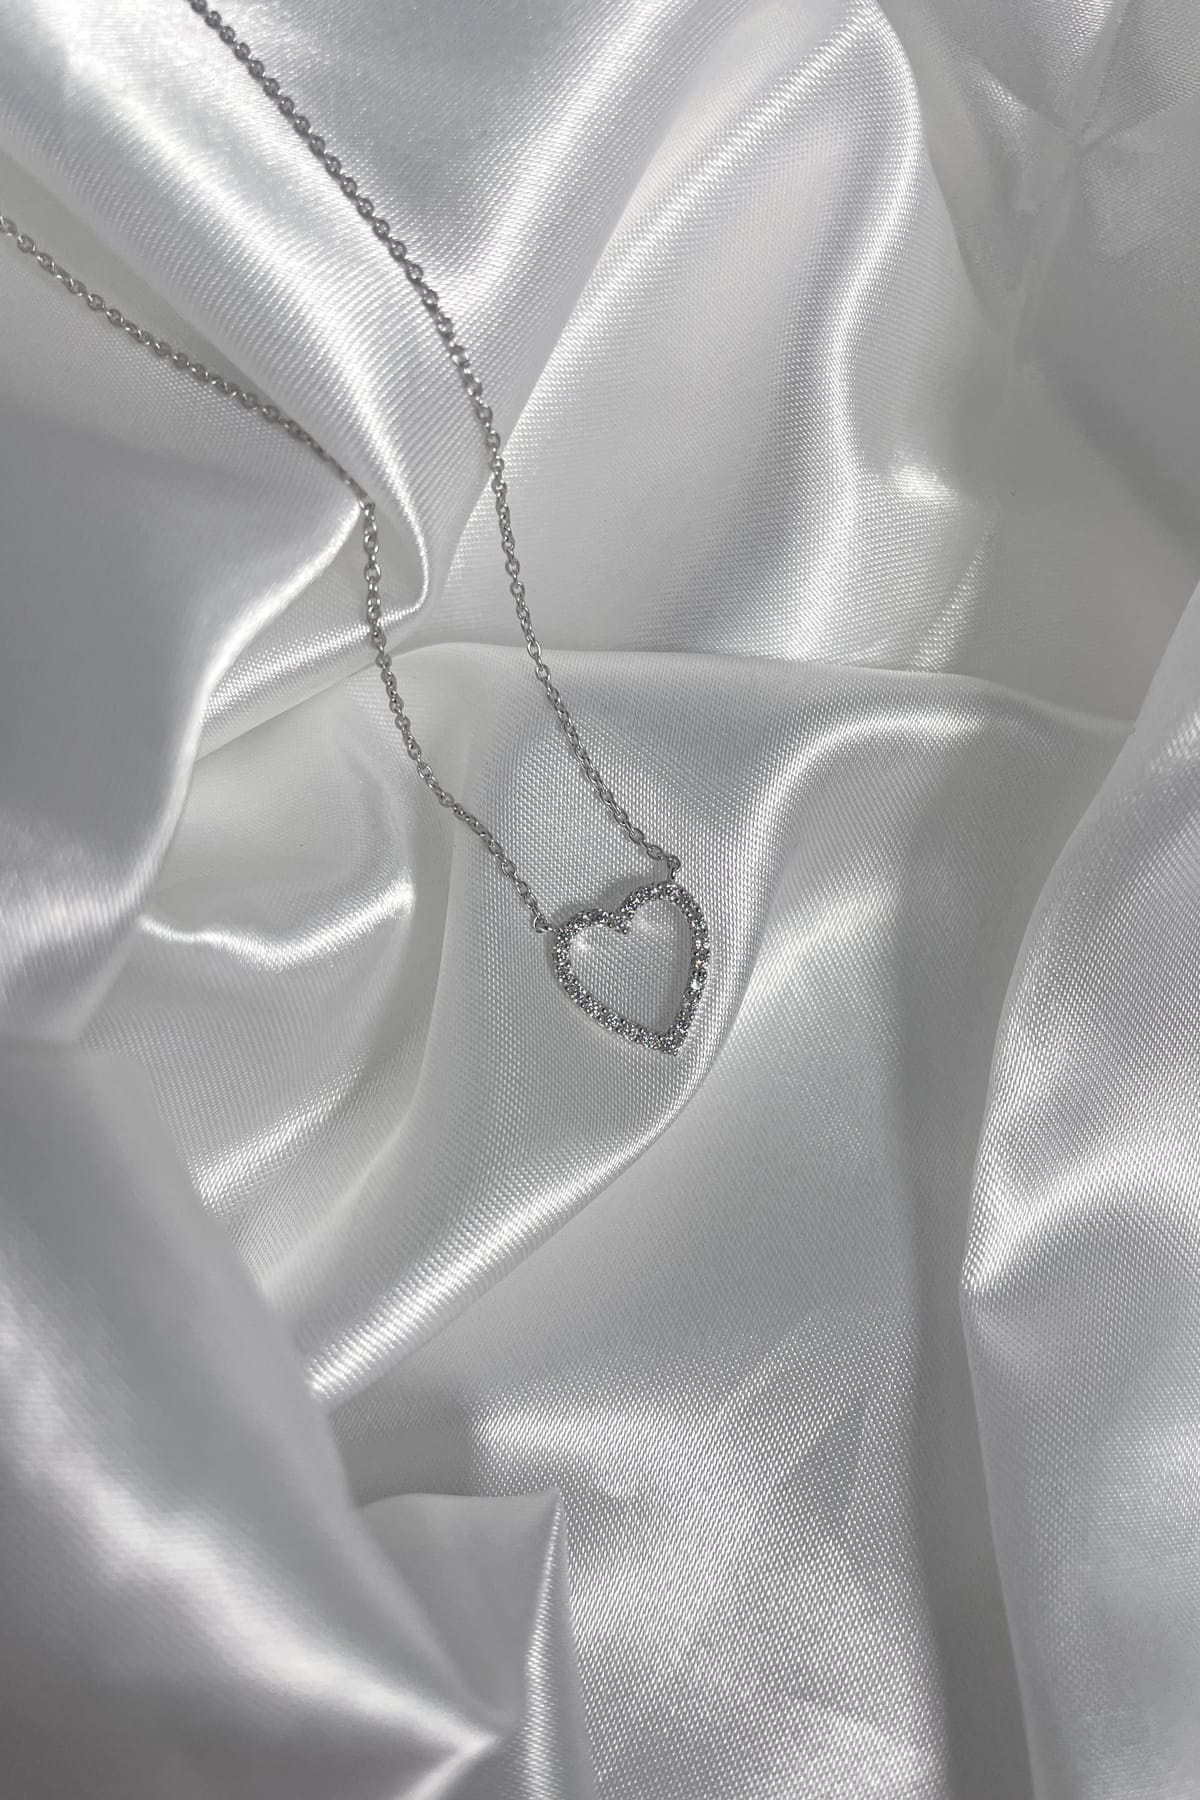 Sterling Silver CZ Open Heart Pendant with Chain available at LeGassick Diamonds and Jewellery Gold Coast, Australia.